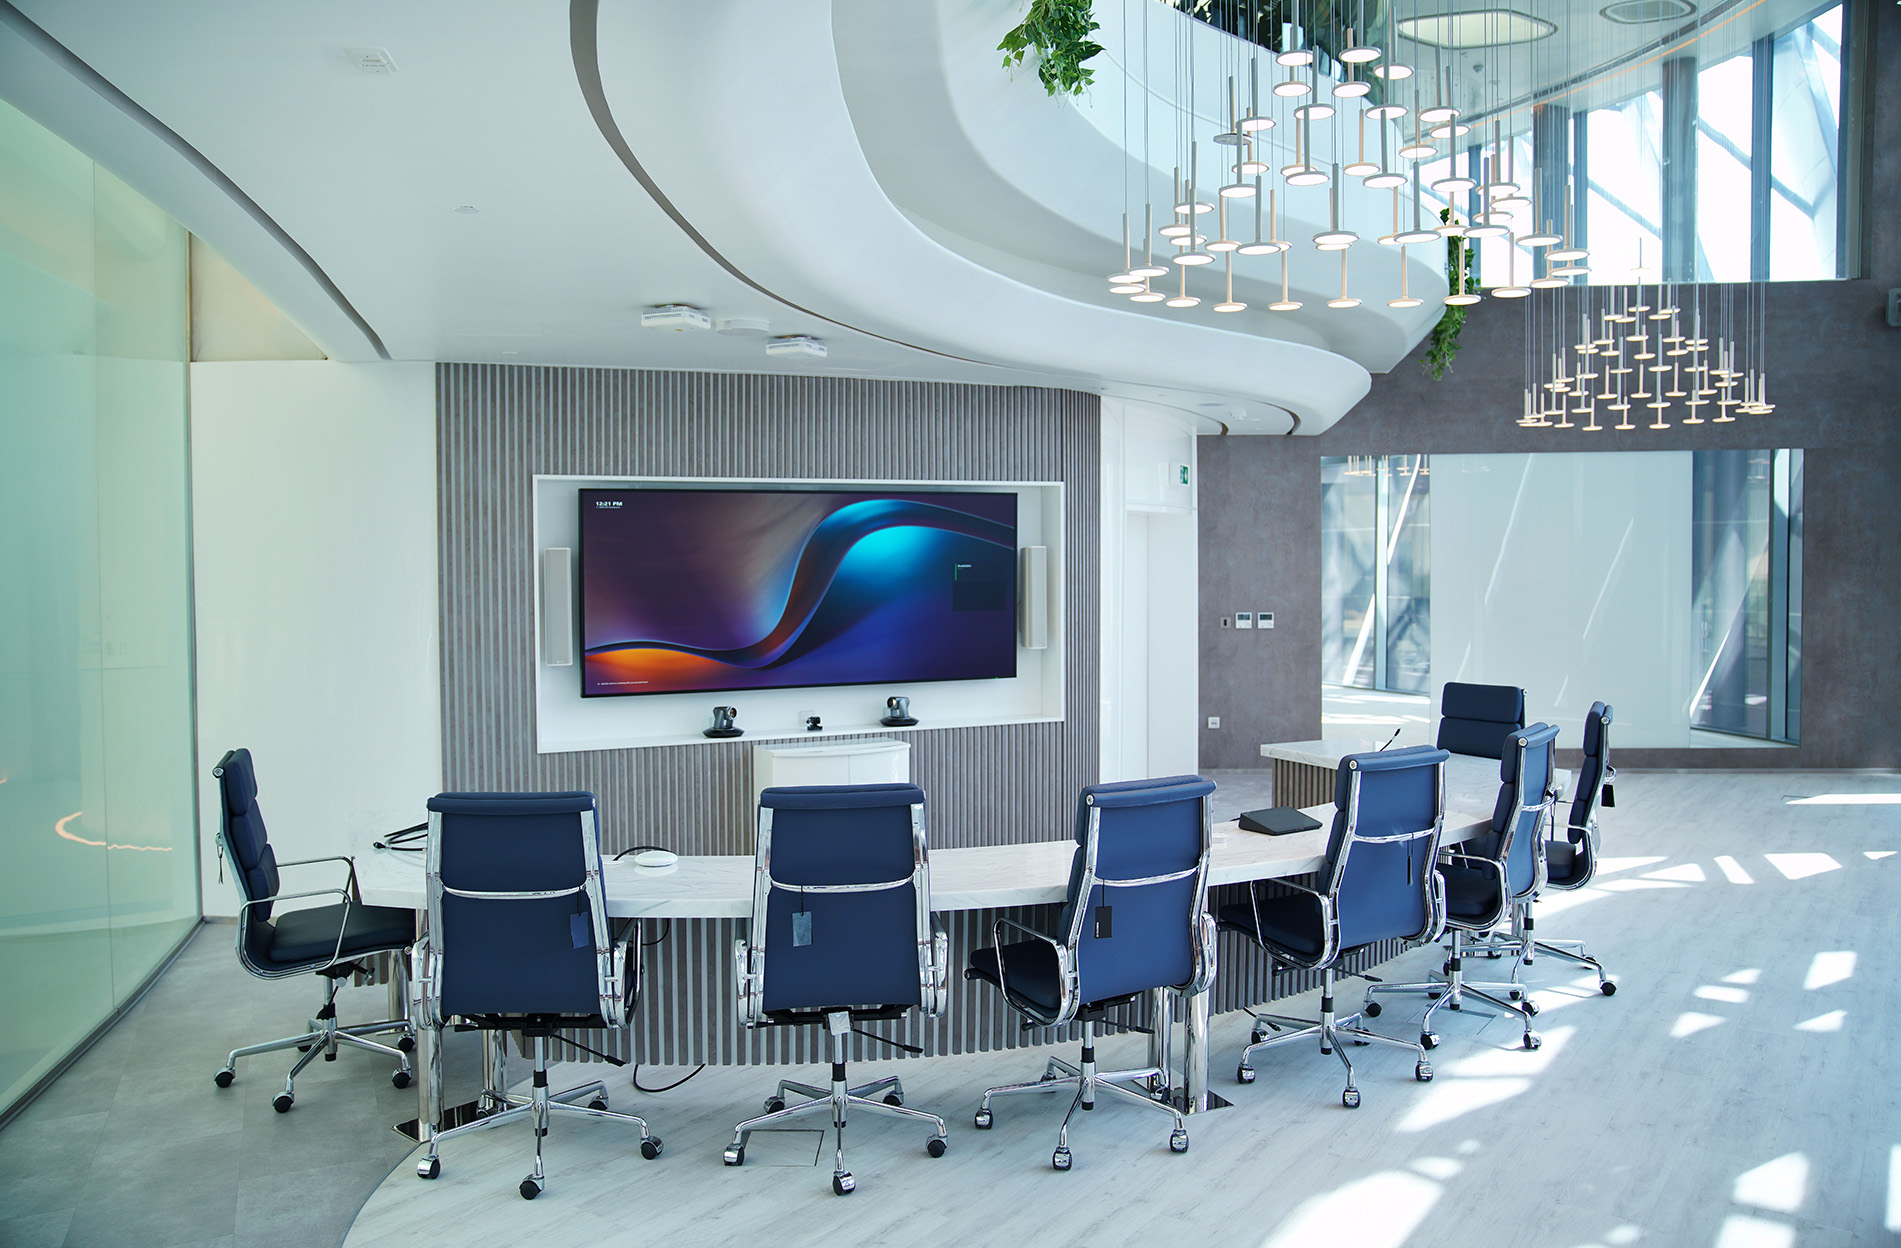 The conference room of the future, this purpose-built hybrid meeting space at Ebdaa has AI technologies